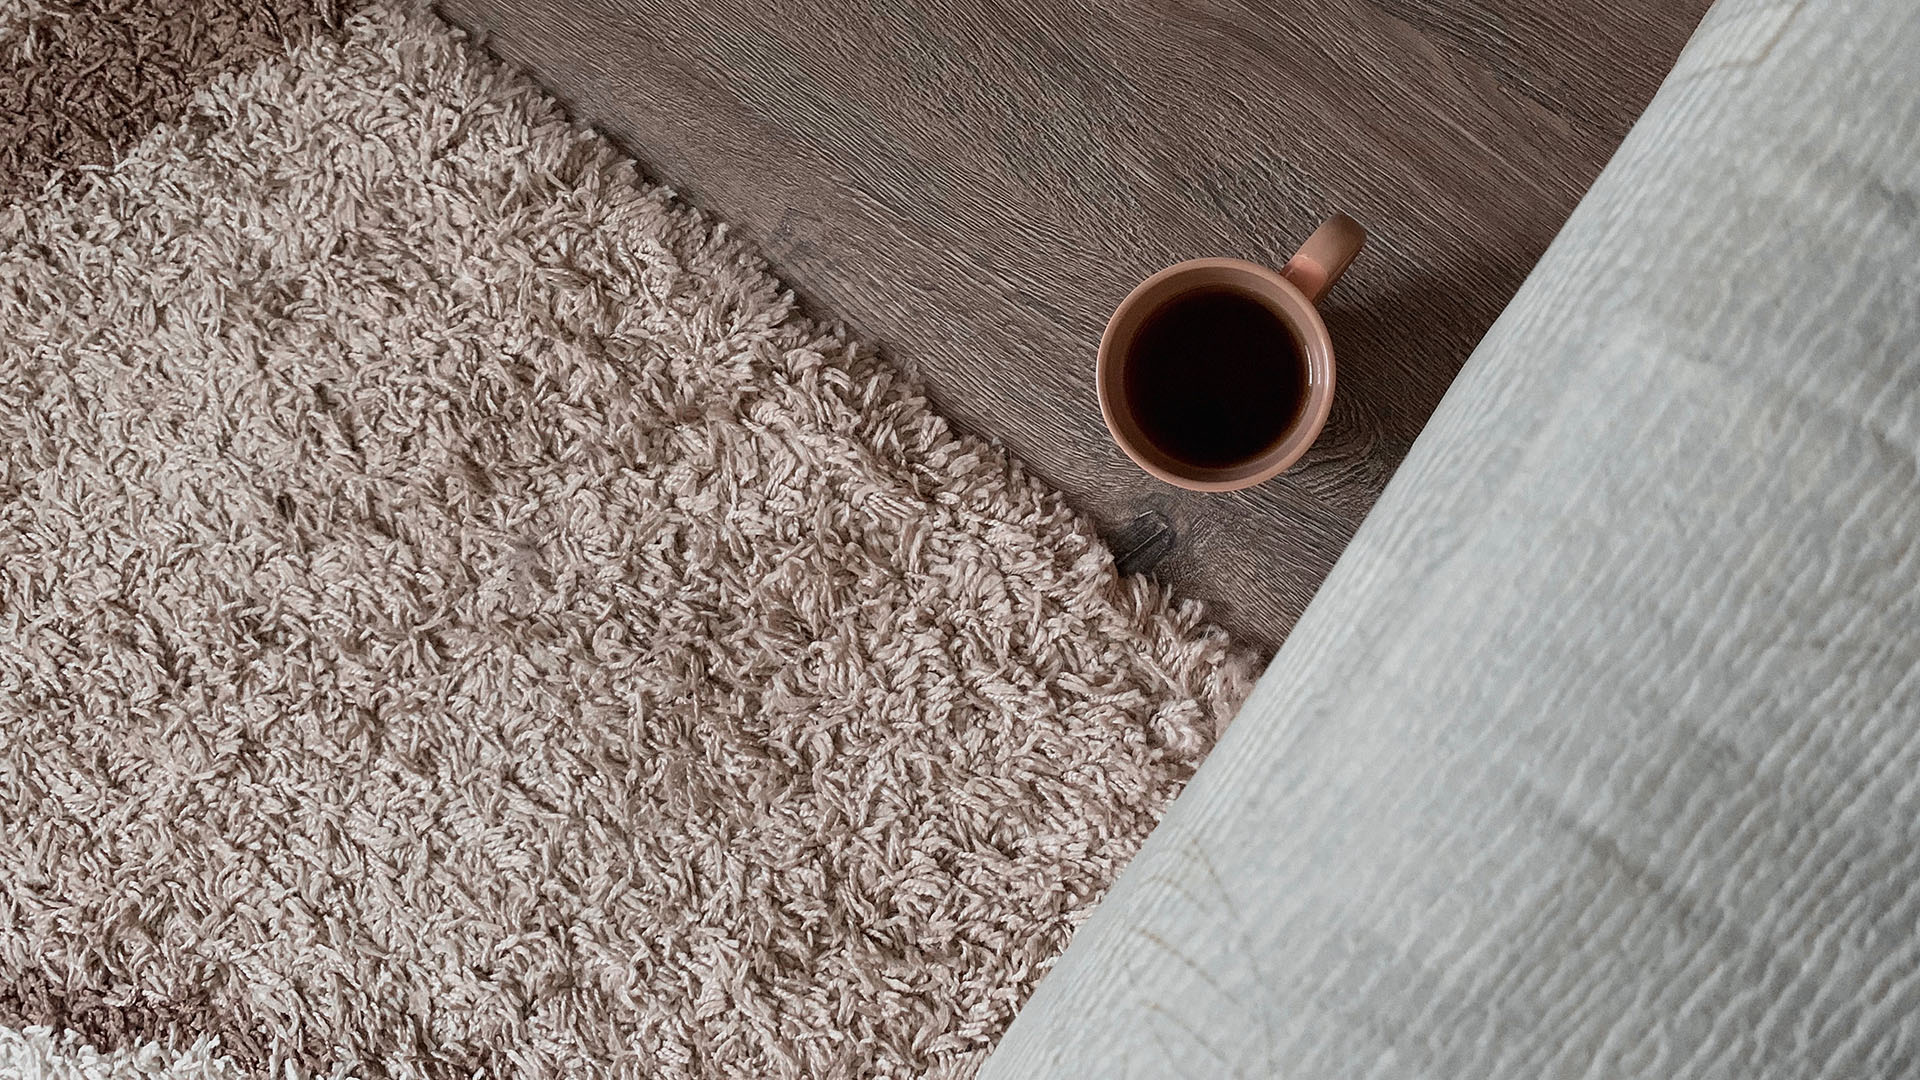 Above a floor photograph, it shows a bed ledge, a fluffy rug, and a mug